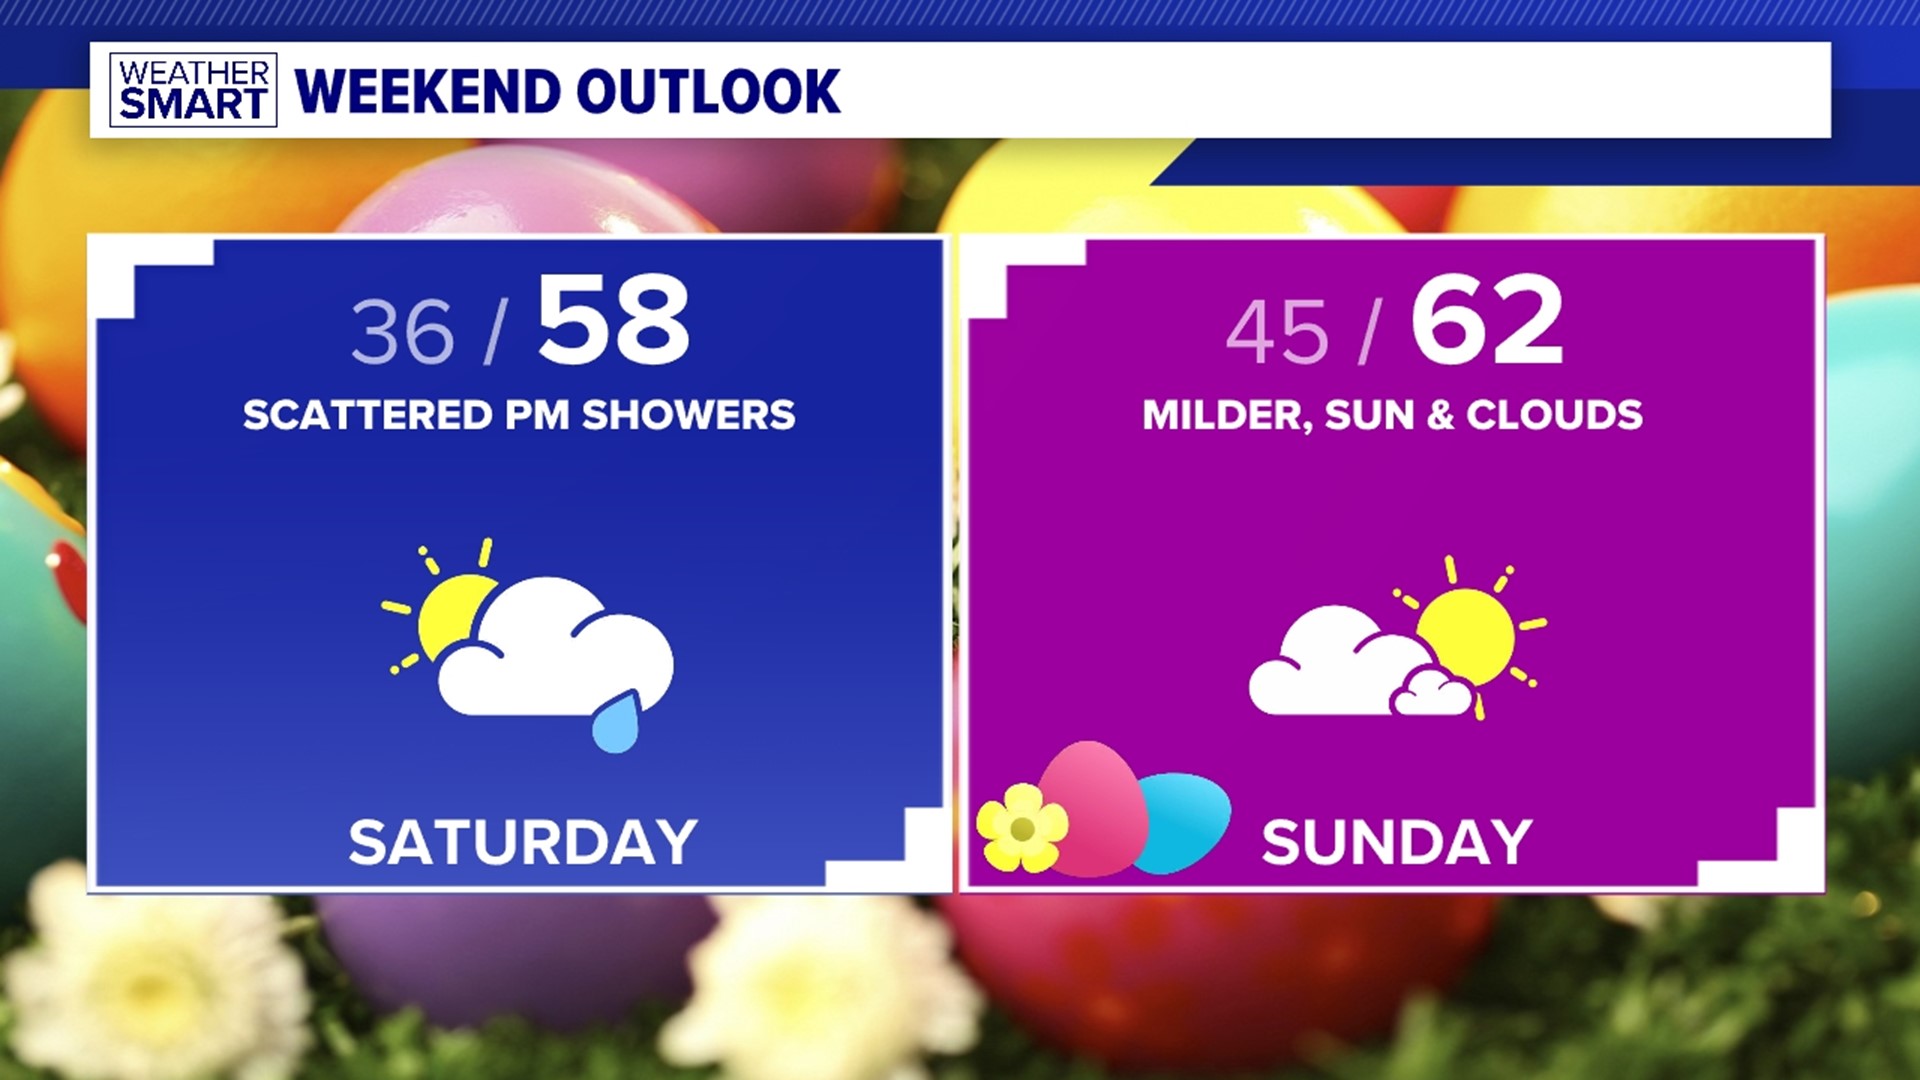 We'll have a few scattered showers around for the start of the weekend, but it won't be all rain all the time! Good news for holiday festivities!